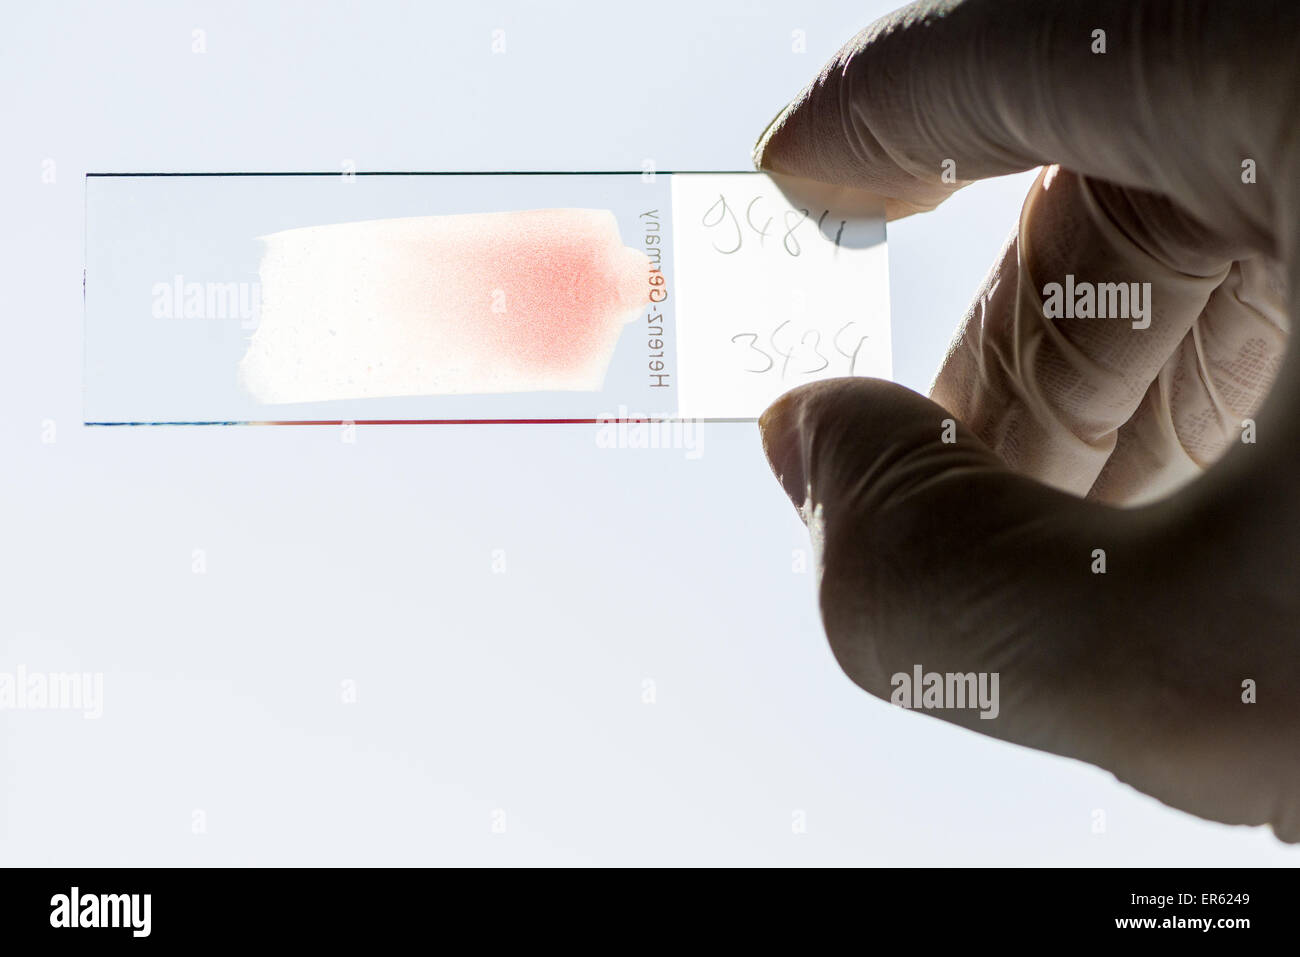 Blood smeared on a glass slide for diagnosis, held against the light in laboratory assistant's hand, Chemnitz, Saxony, Germany Stock Photo